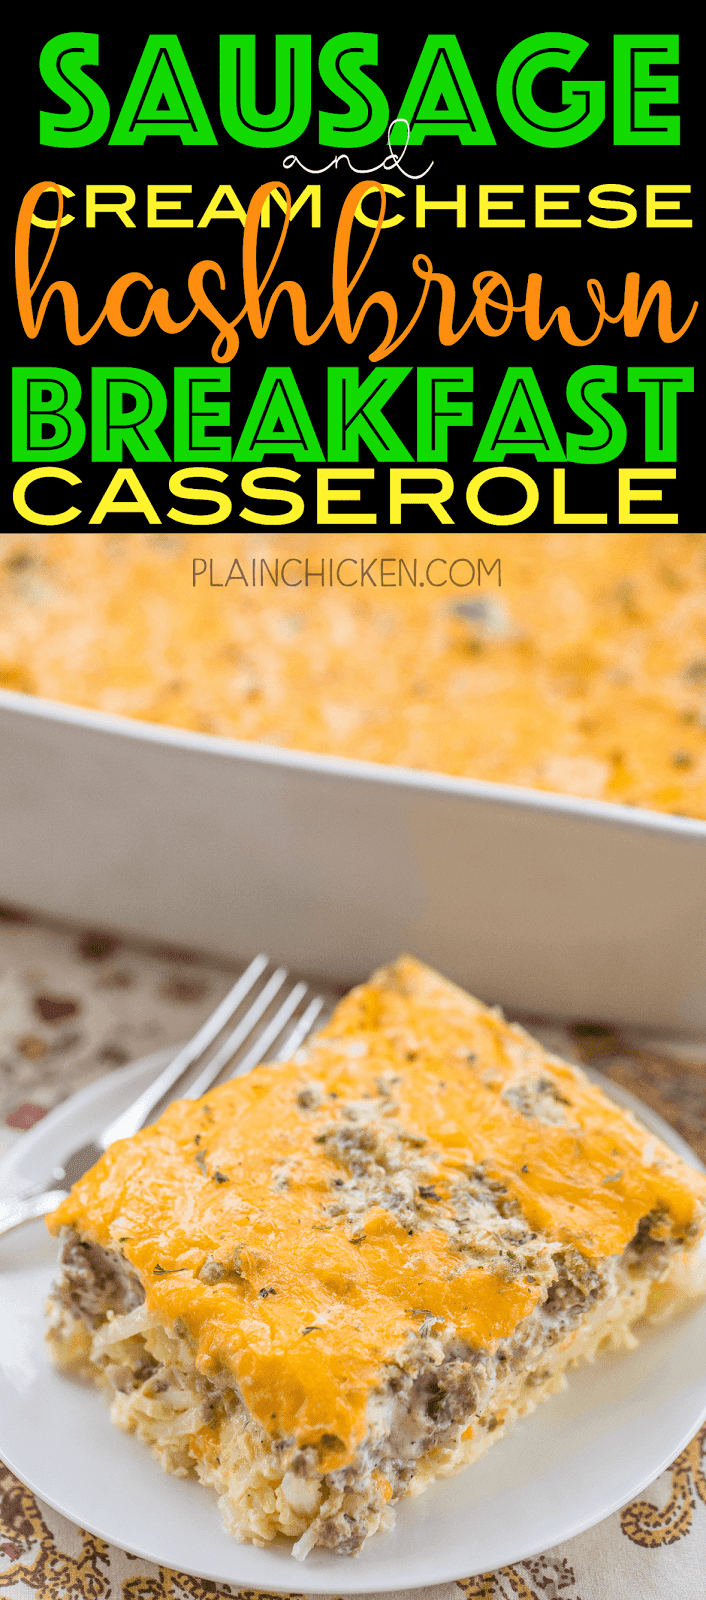 Sausage & Cream Cheese Hashbrown Breakfast Casserole - all of my favorite breakfast foods in one easy casserole! Frozen hashbrowns, sausage, cream cheese, eggs and cheddar cheese. Can make ahead of time and refrigerate or freeze for later. Can split between two pans and bake one and freeze one for later. This breakfast casserole is great for breakfast, lunch, great for brunch, potlucks, tailgating and any upcoming holiday breakfasts! SO GOOD!